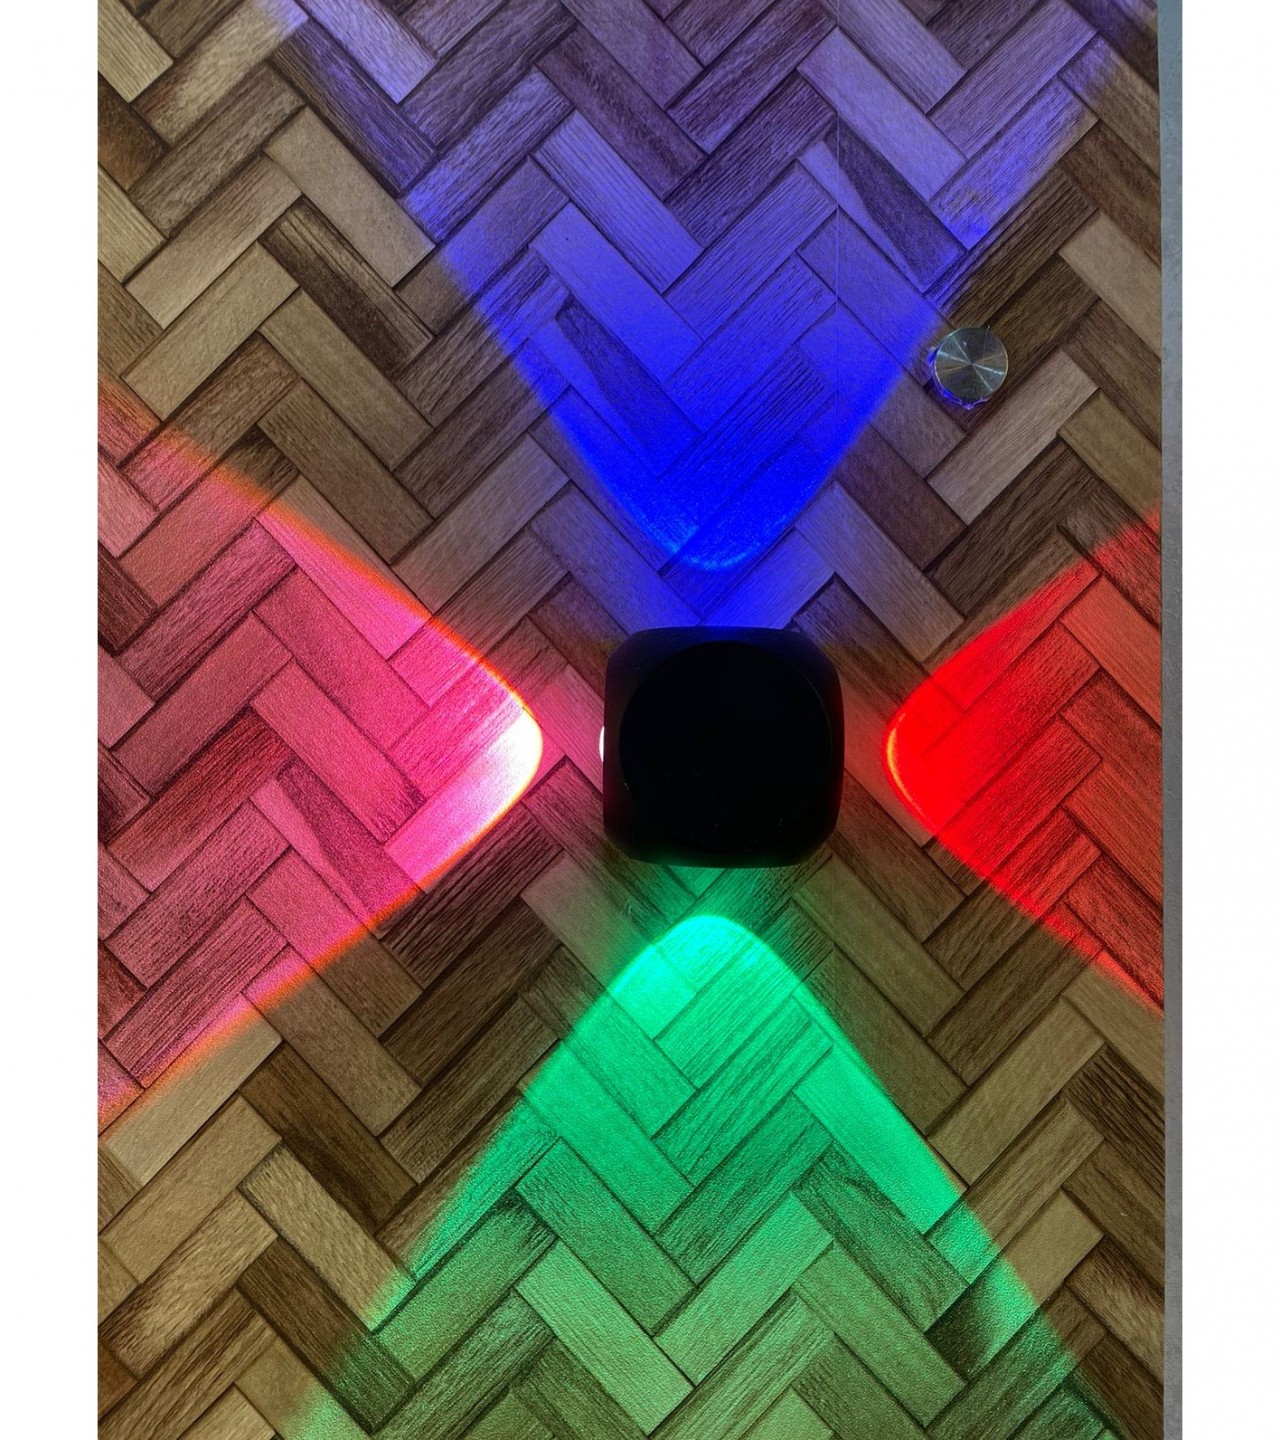 Four way/sided Cube Waterproof Outdoor, Indoor RGB (Red, Green, Blue) Light Light